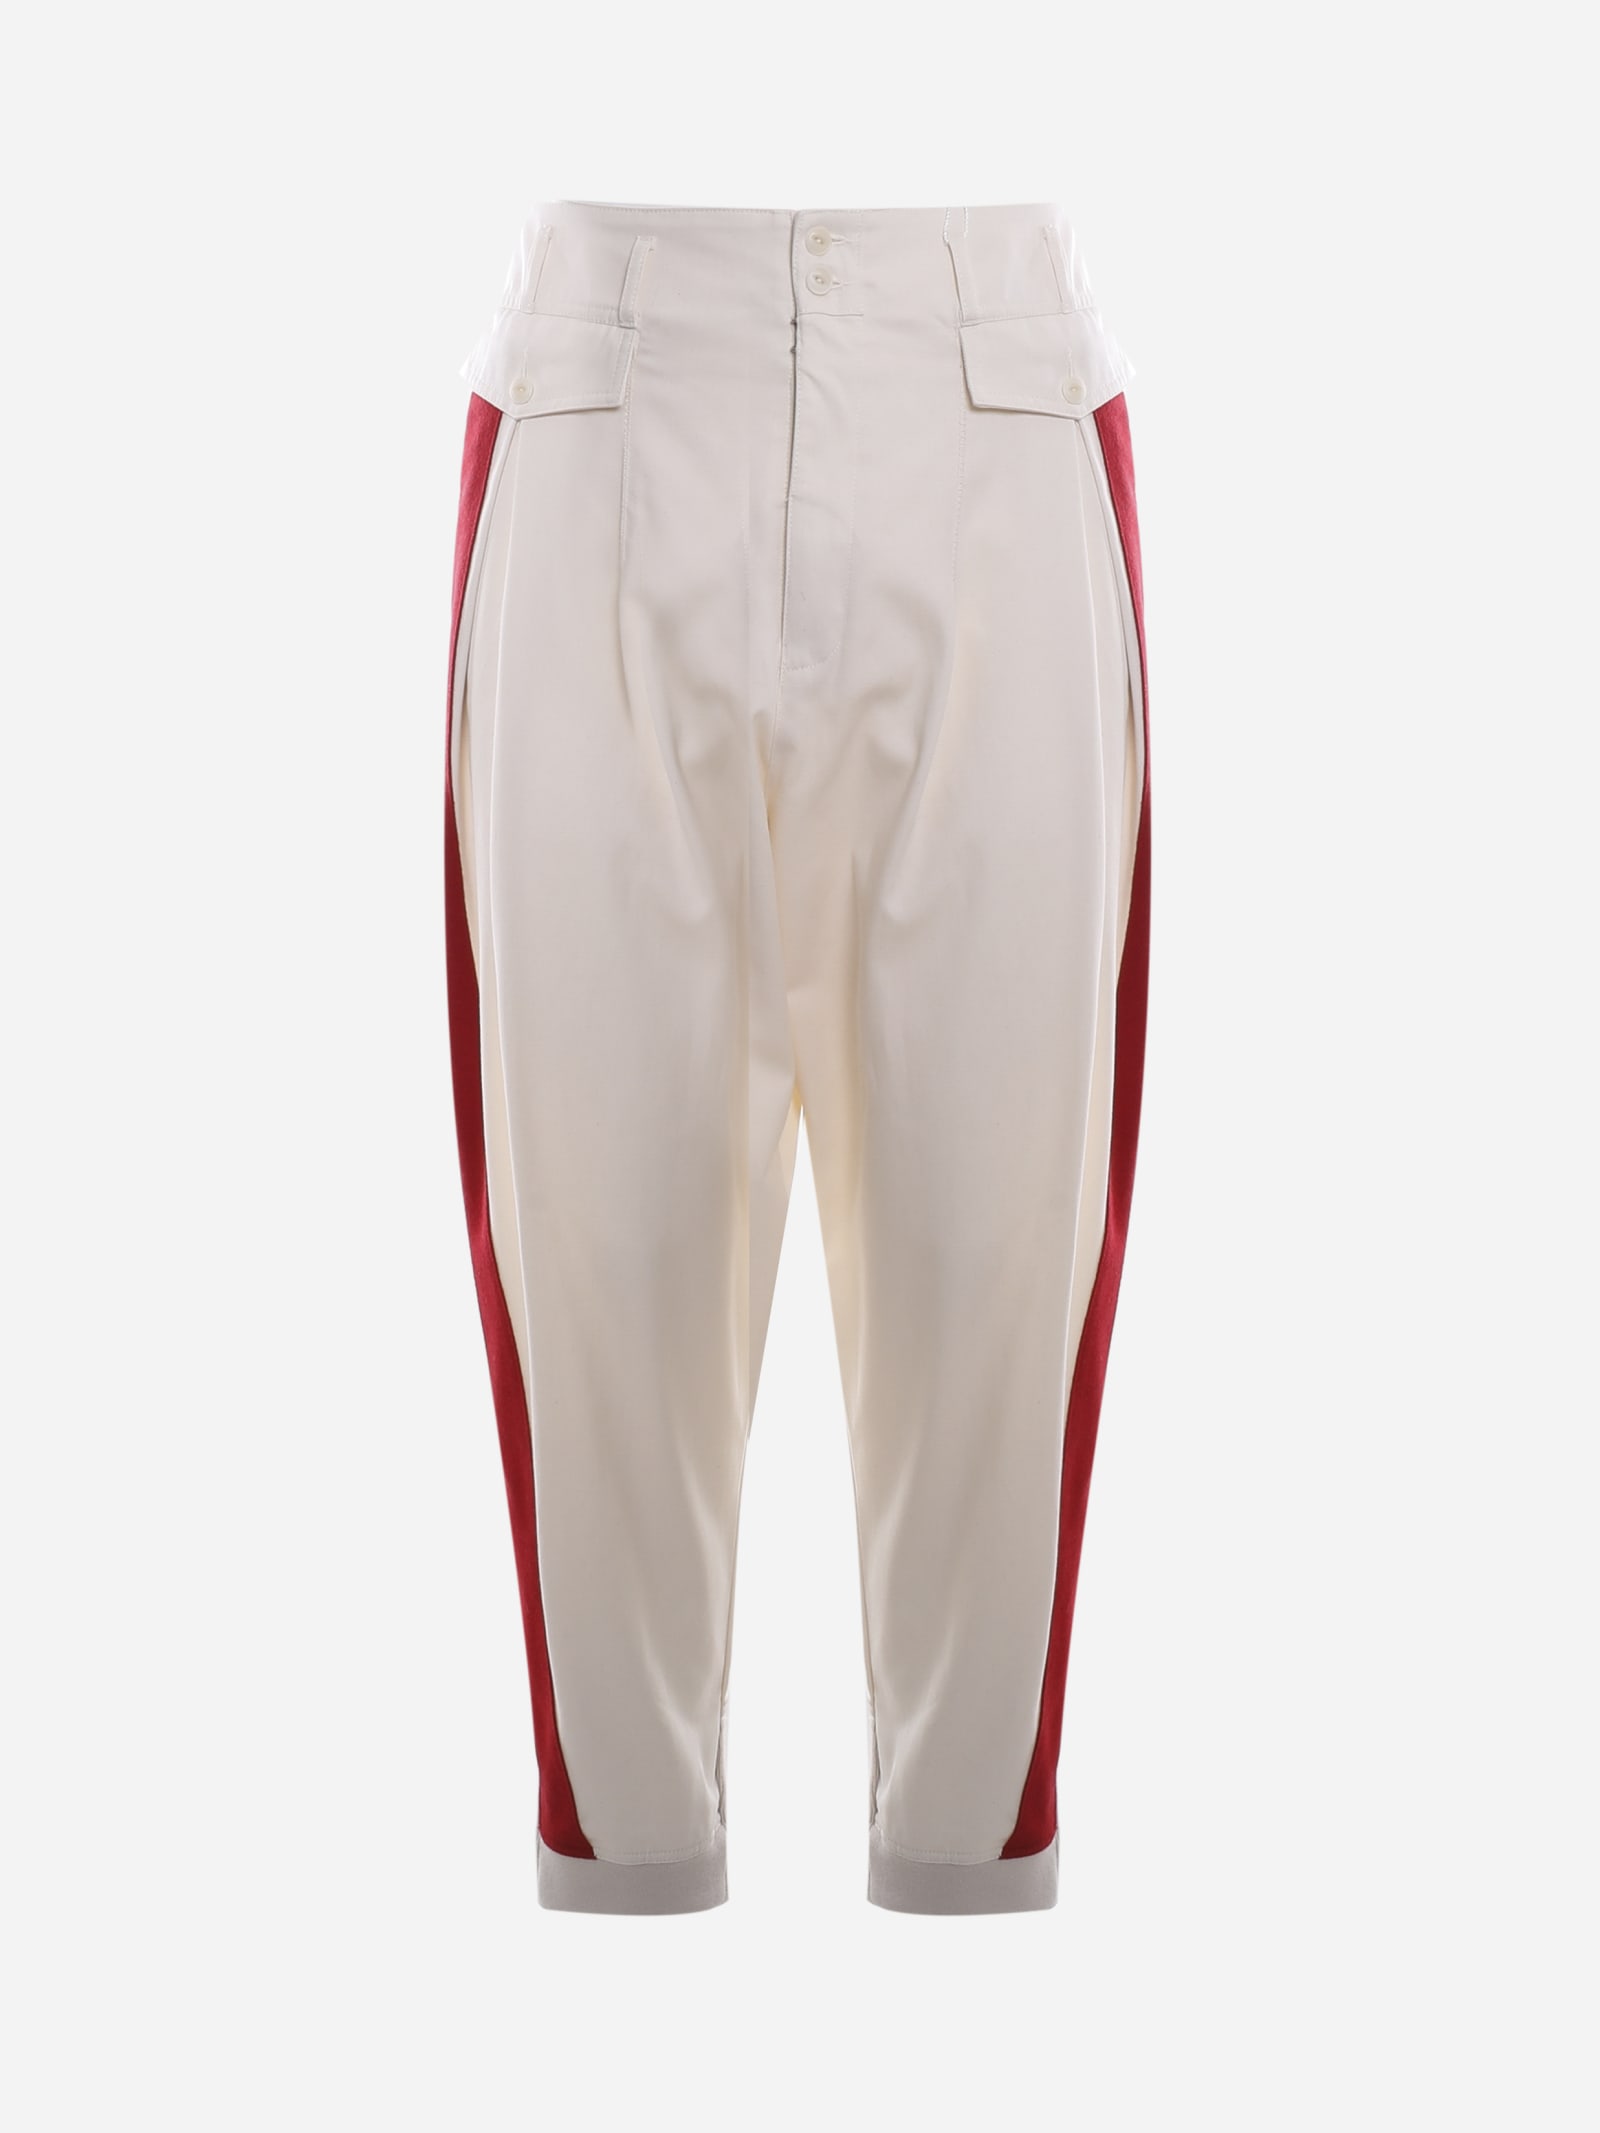 Maison Margiela Cotton Trousers With Contrasting Side Bands